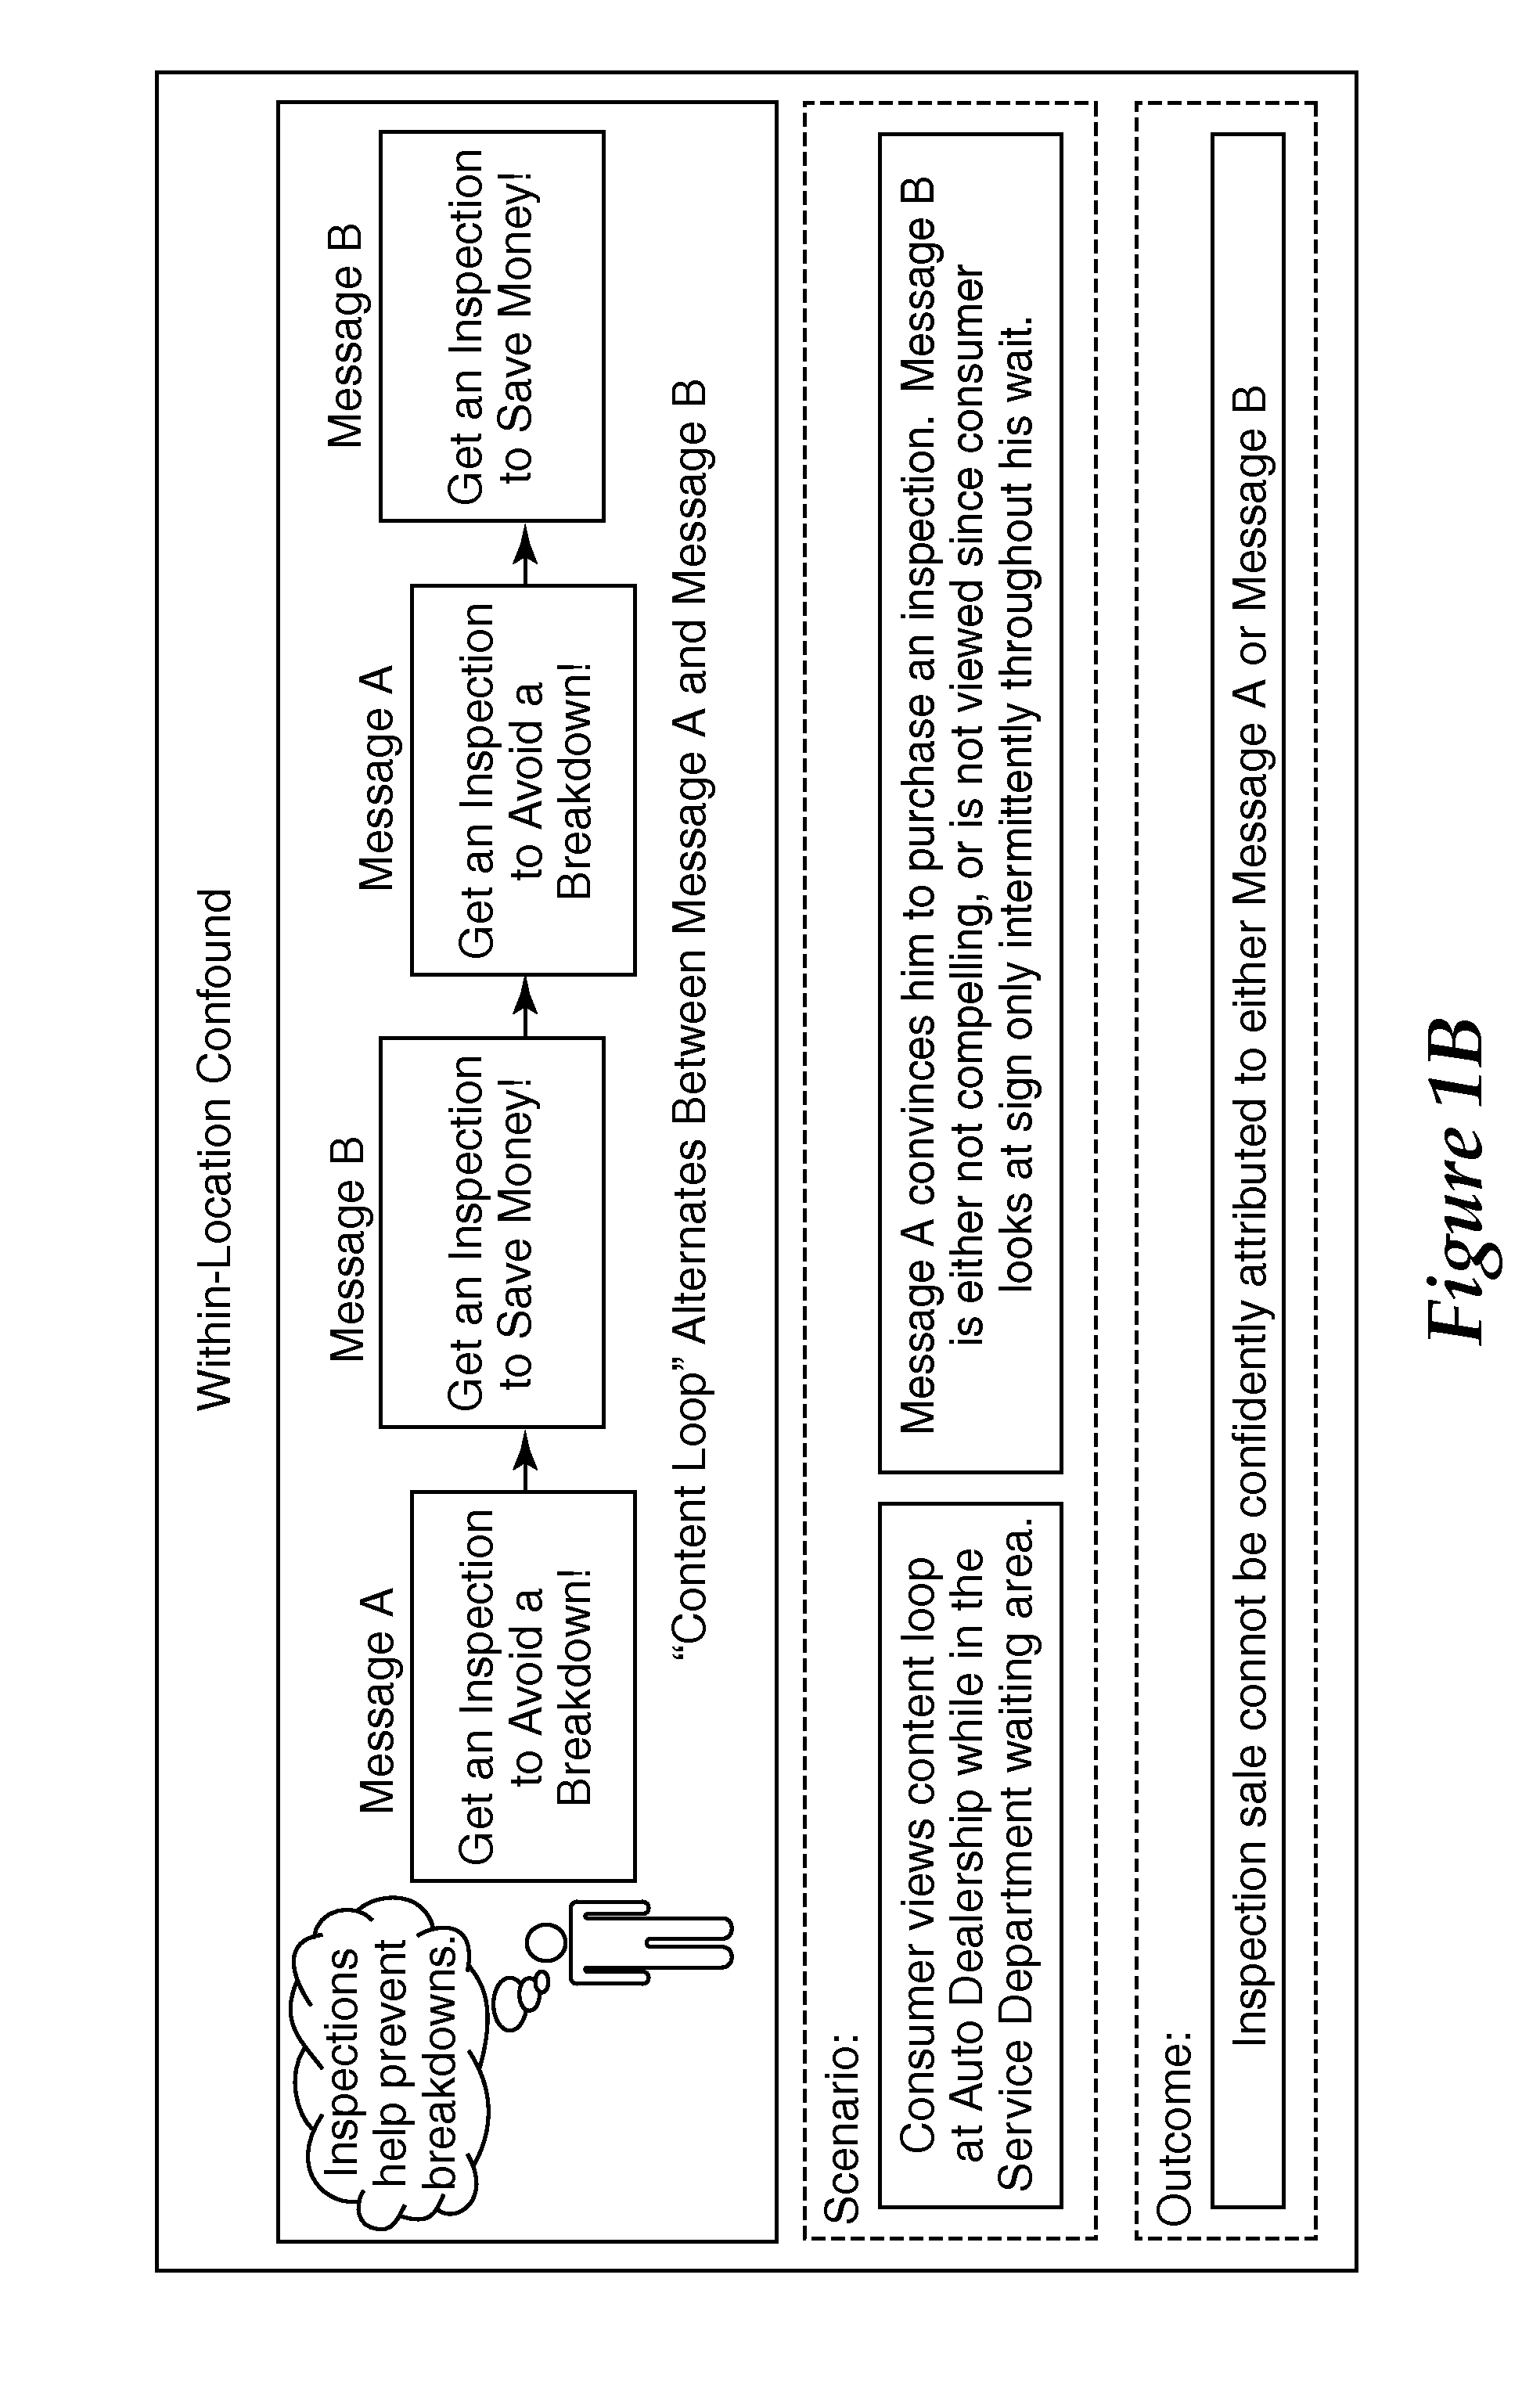 System and method for generating time-slot samples to which content may be assigned for measuring effects of the assigned content